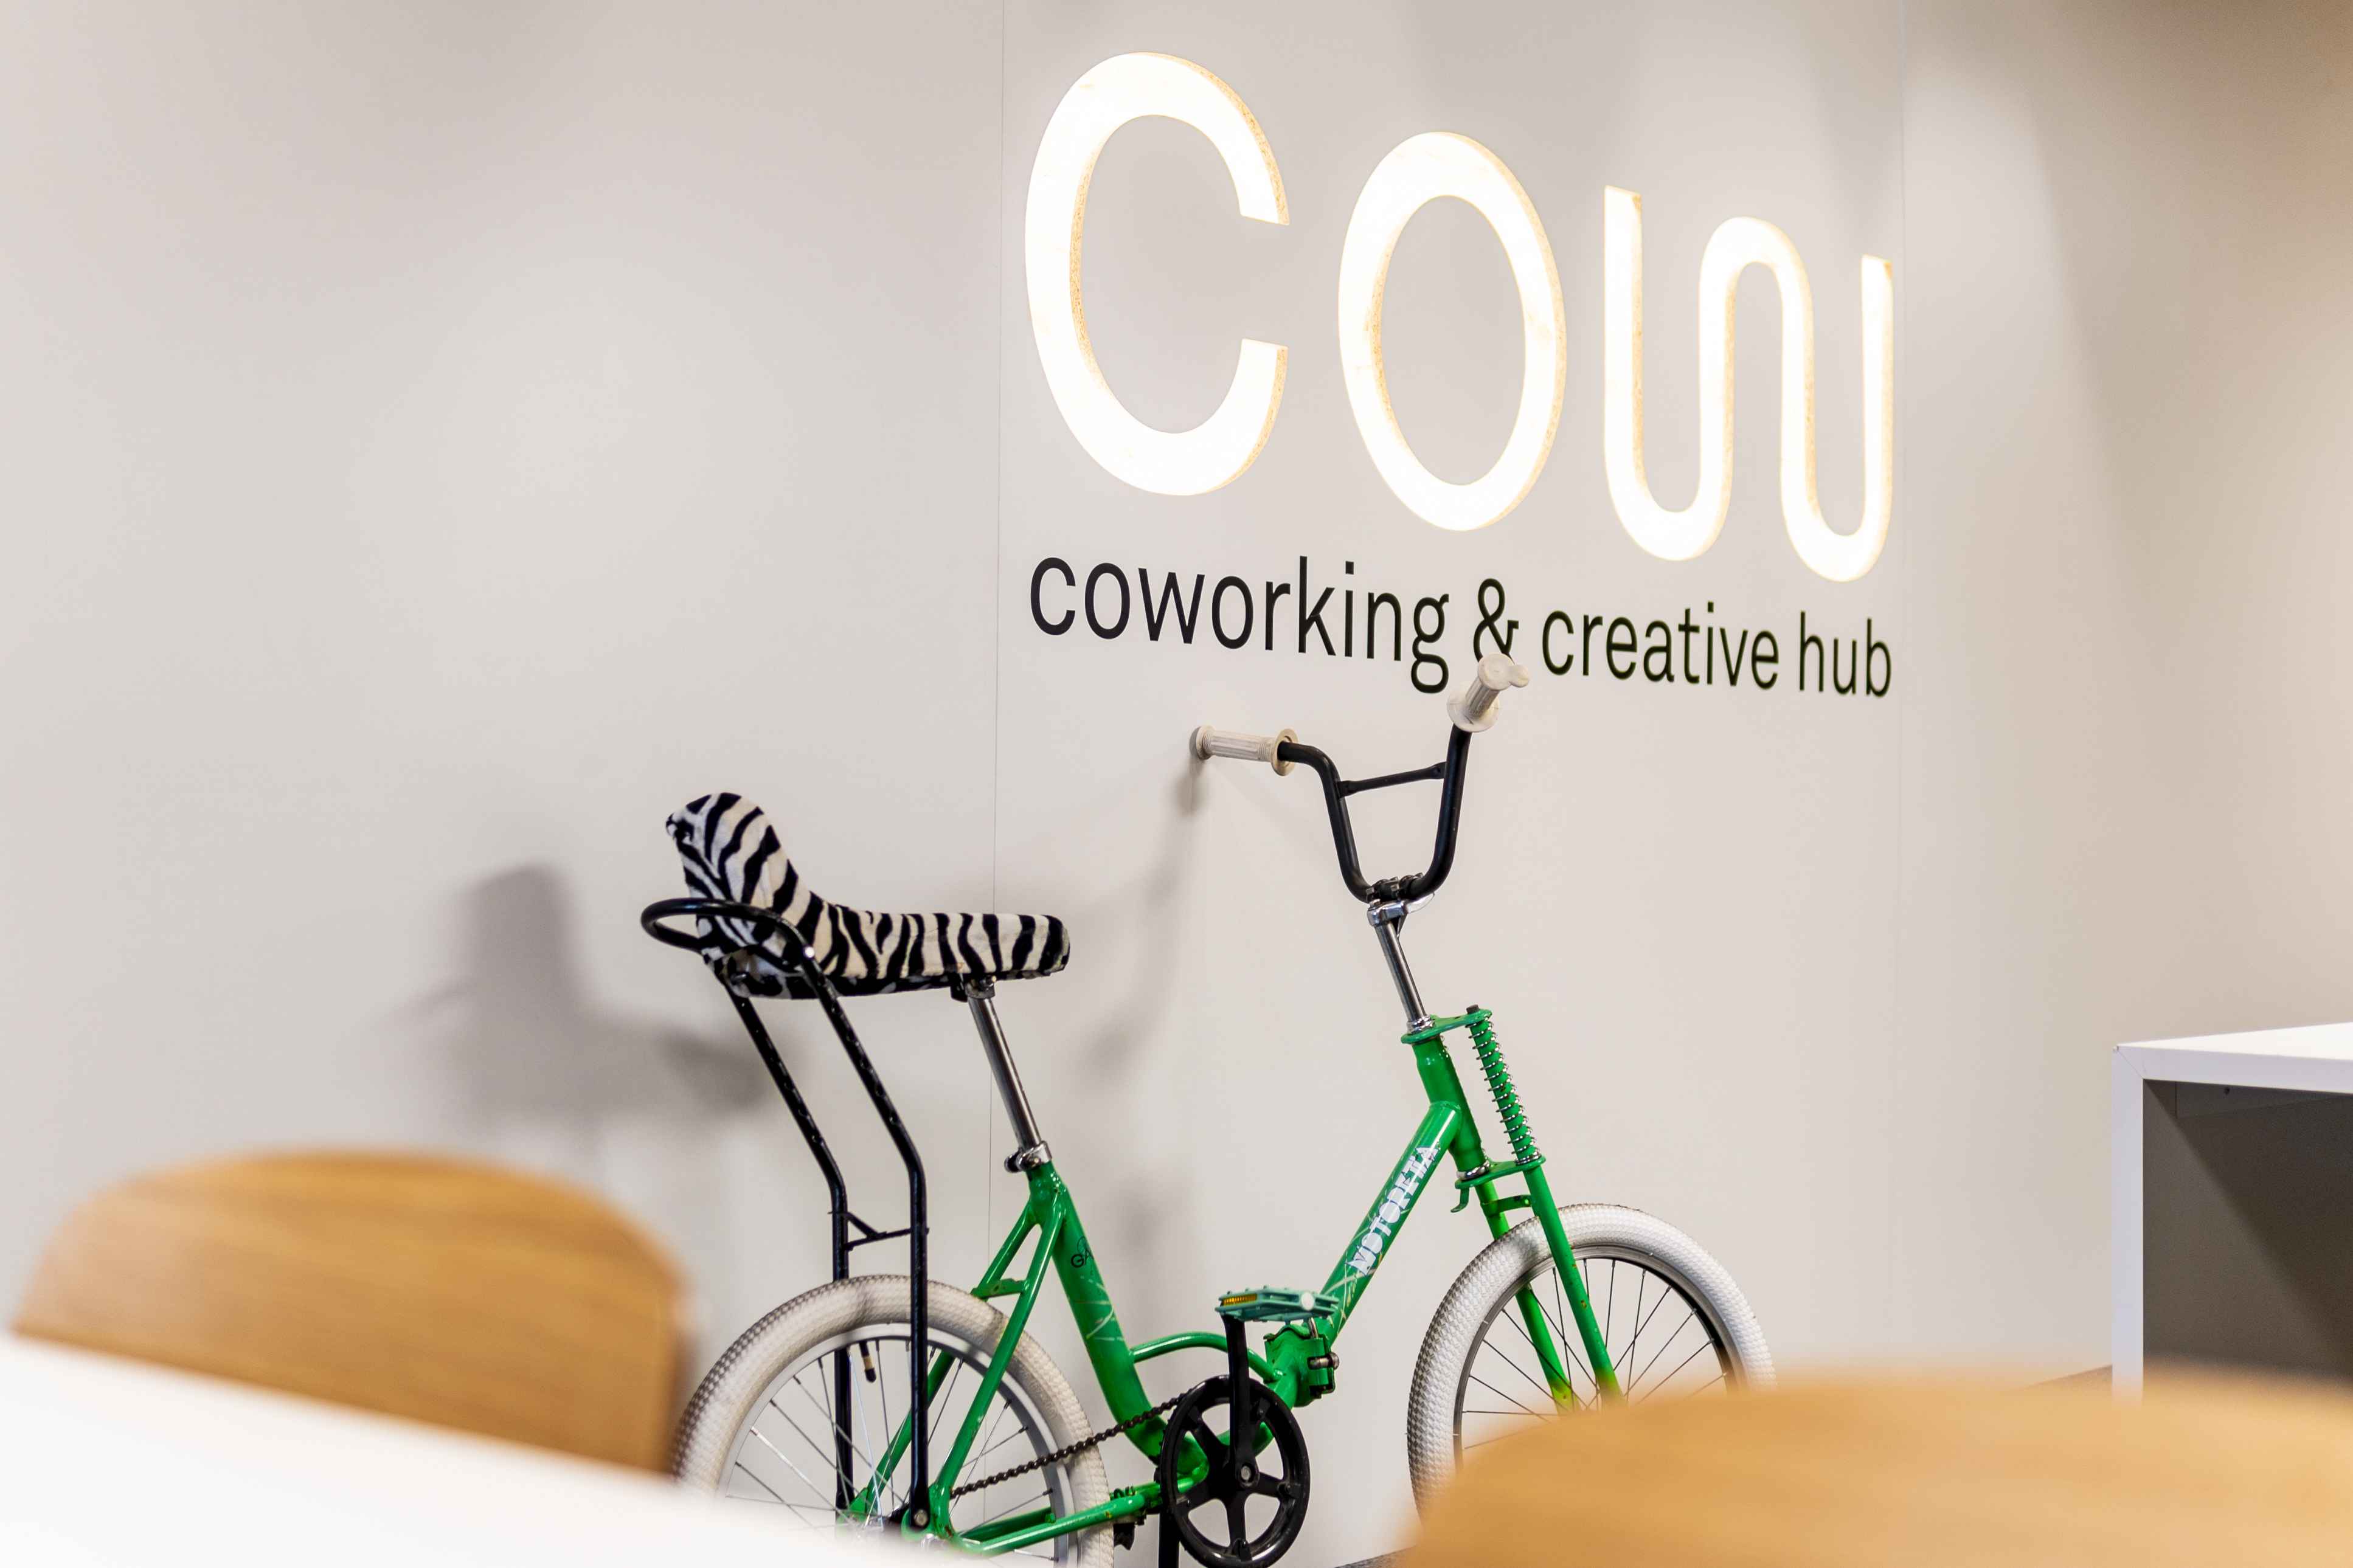 Cow coworking & creative hub cover image